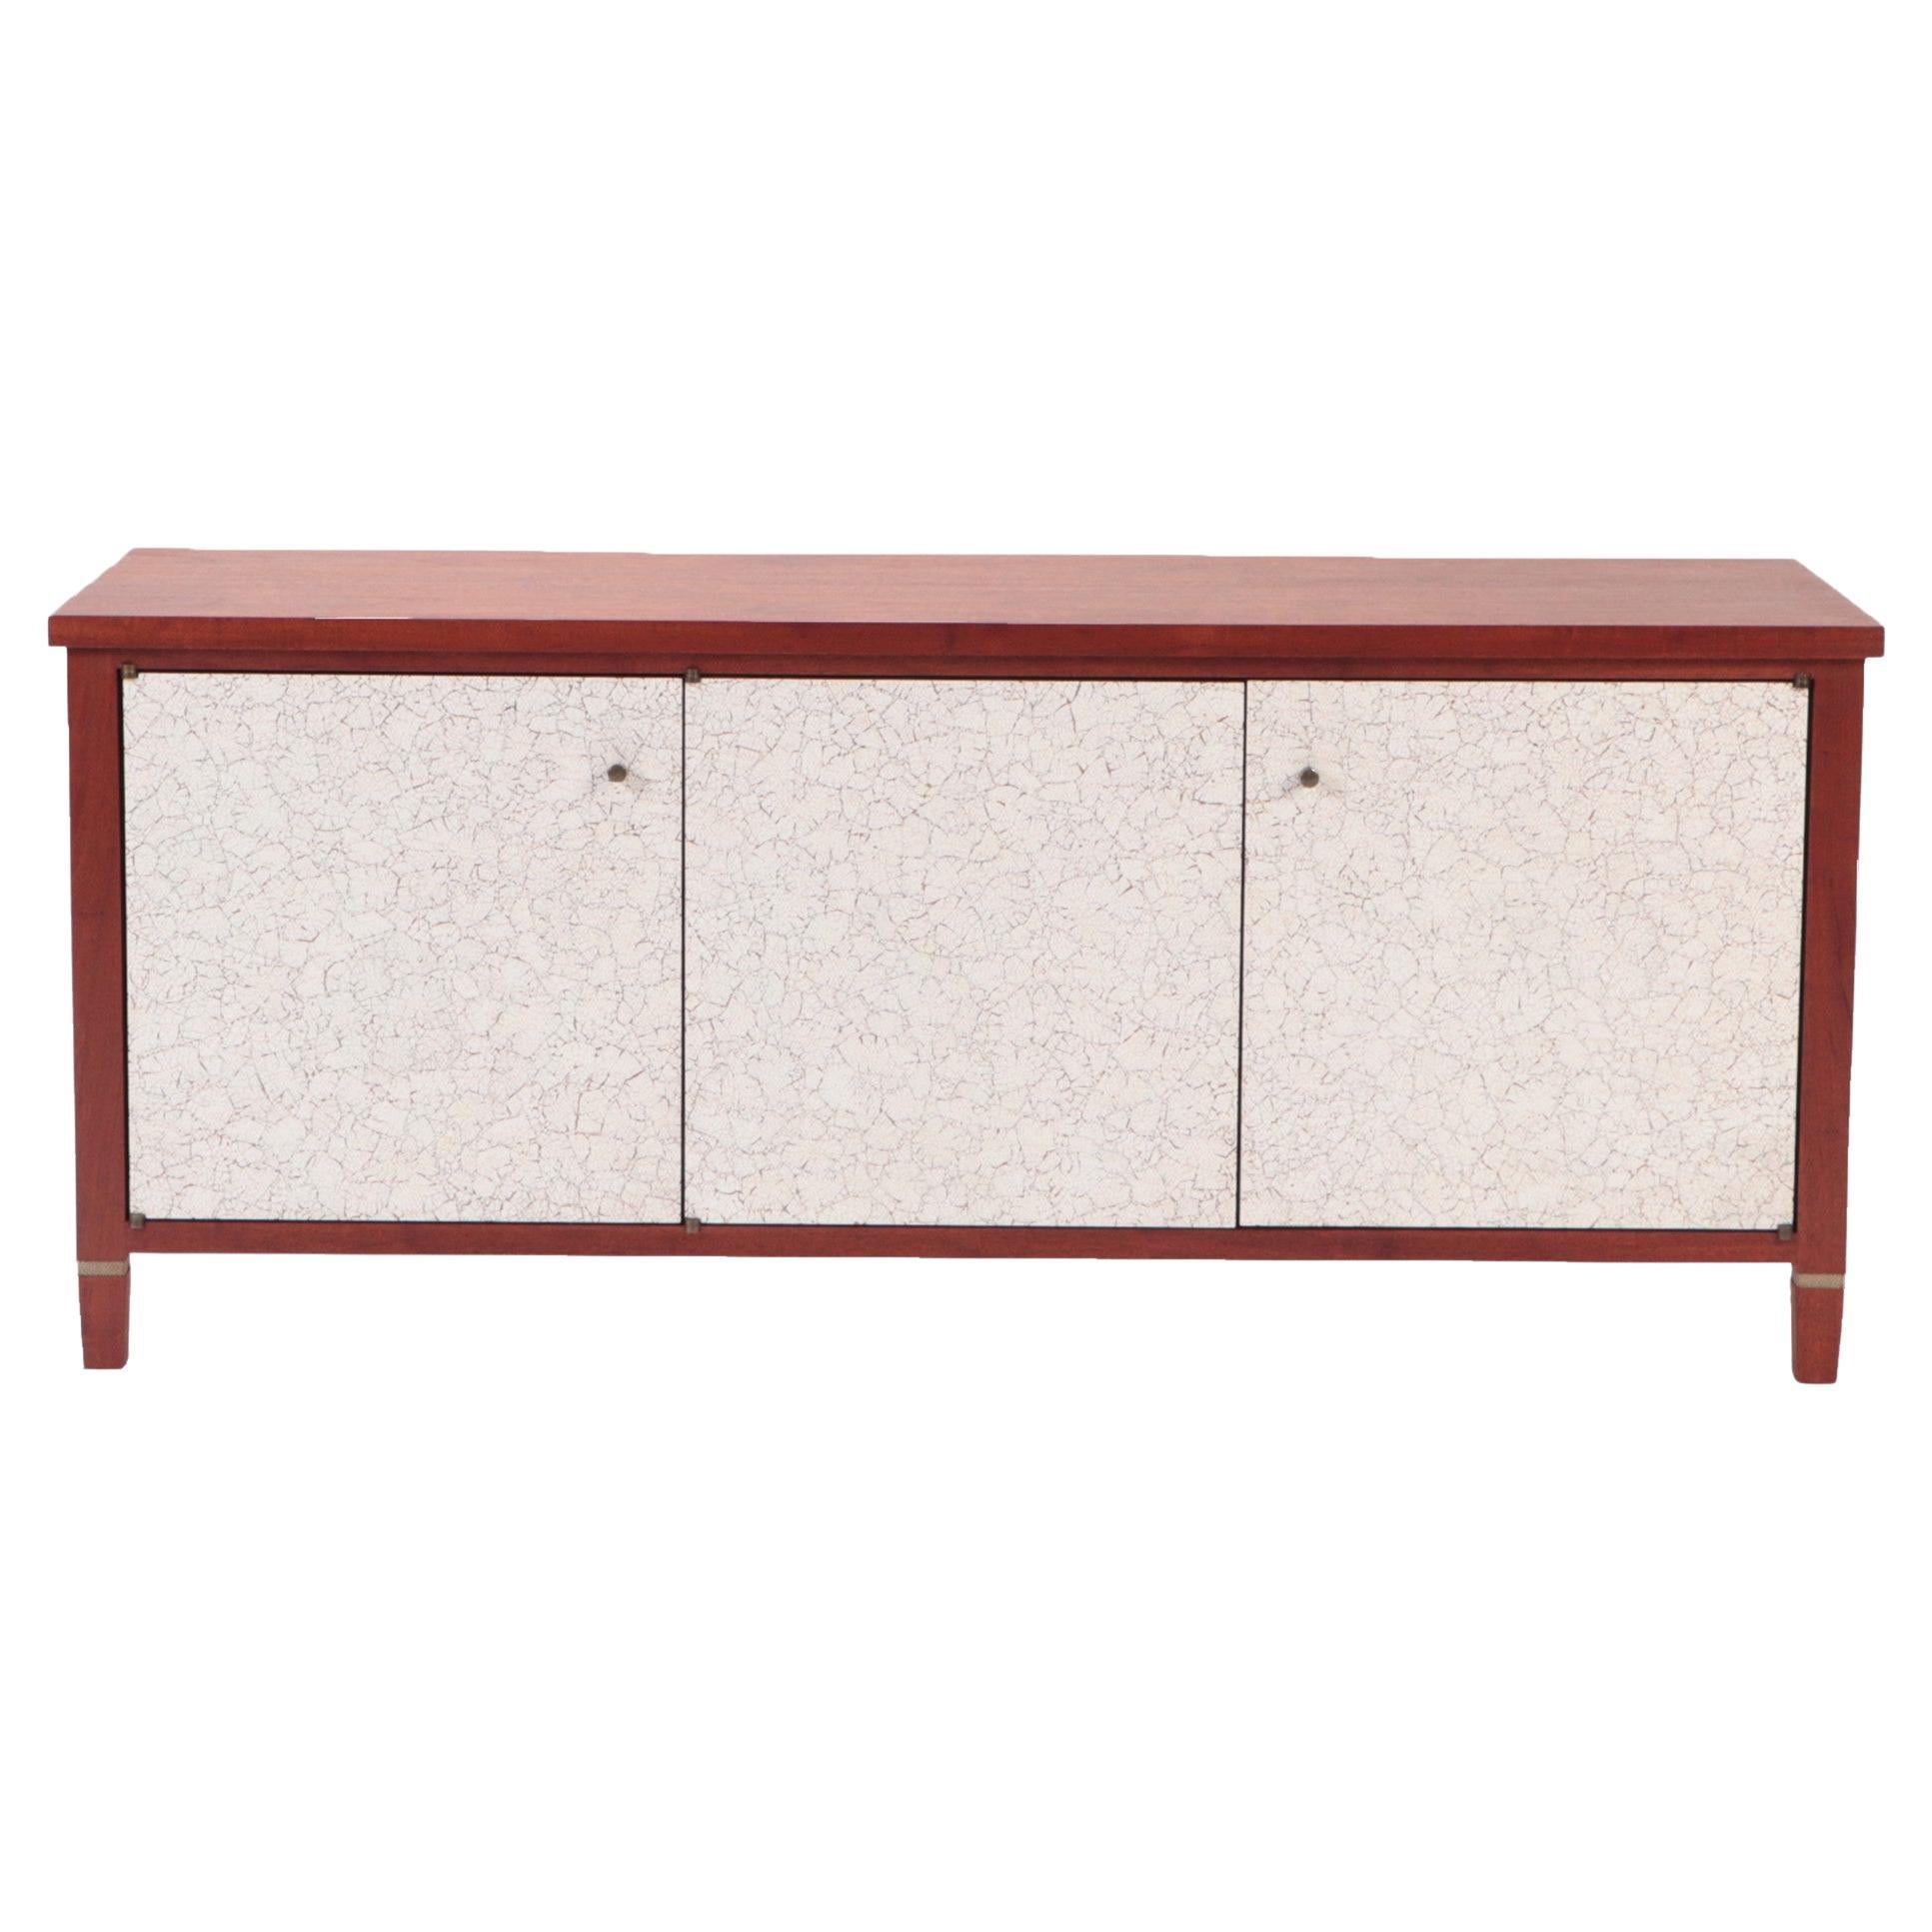 Contemporary Mahogany Wheeler Credenza, by Andy Messenger, 2019 For Sale